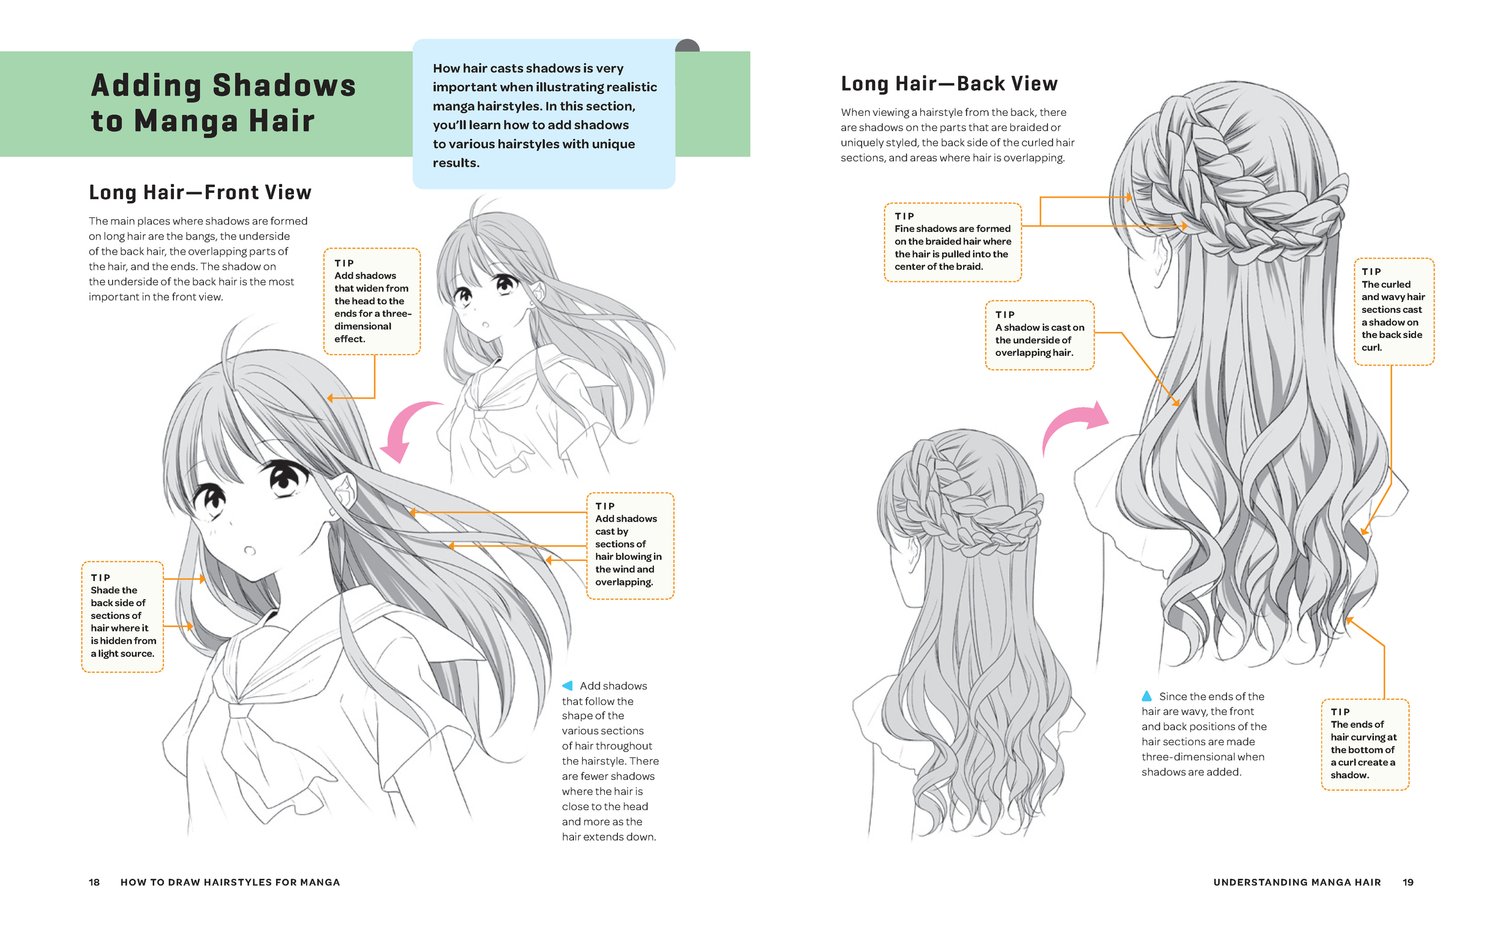 How to Draw Hairstyles for Manga by Studio Hard Deluxe, Quarto At A Glance